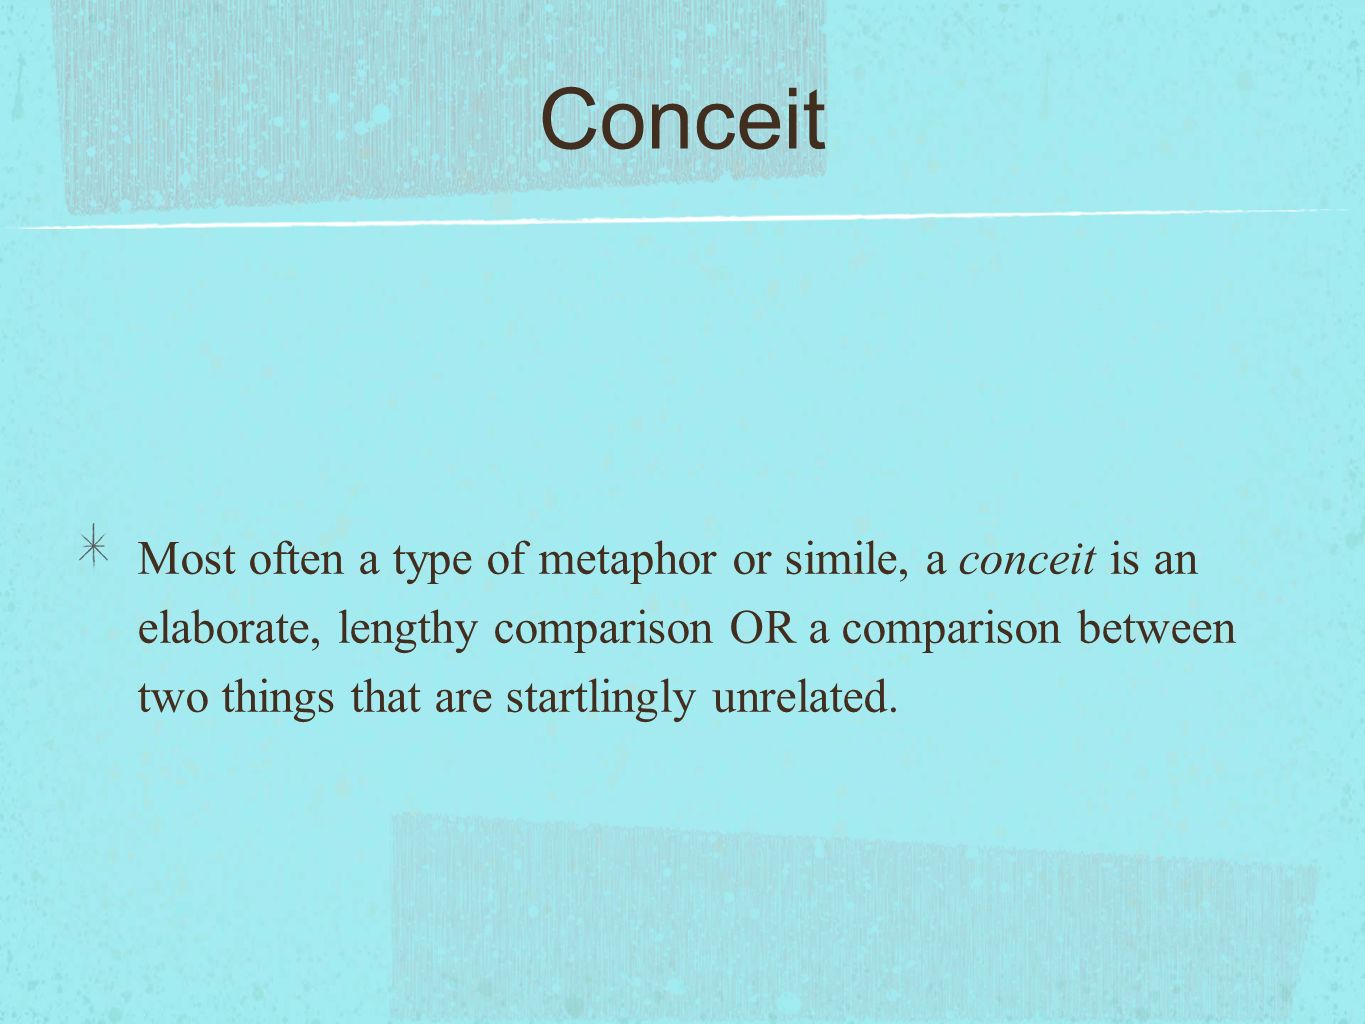 Conceit Most often a type of metaphor or simile, a conceit is an elaborate, lengthy comparison OR a comparison between two things that are startlingly unrelated.